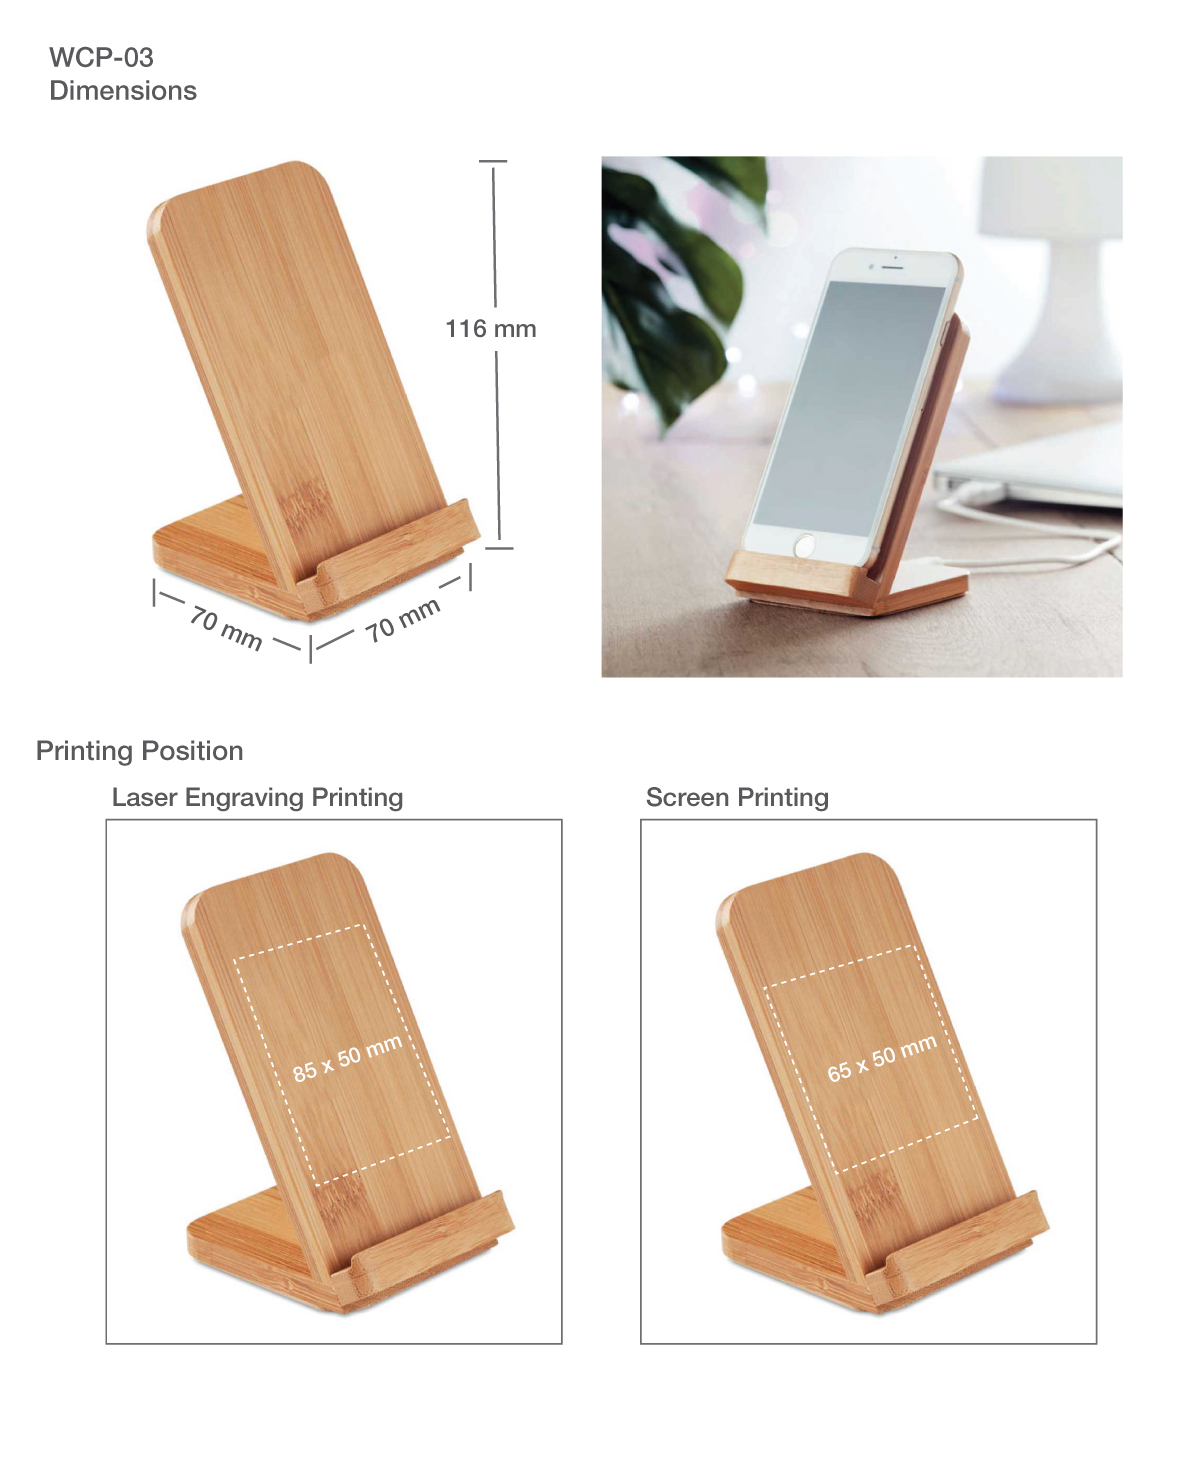 Bamboo Wireless Charger WCP-03